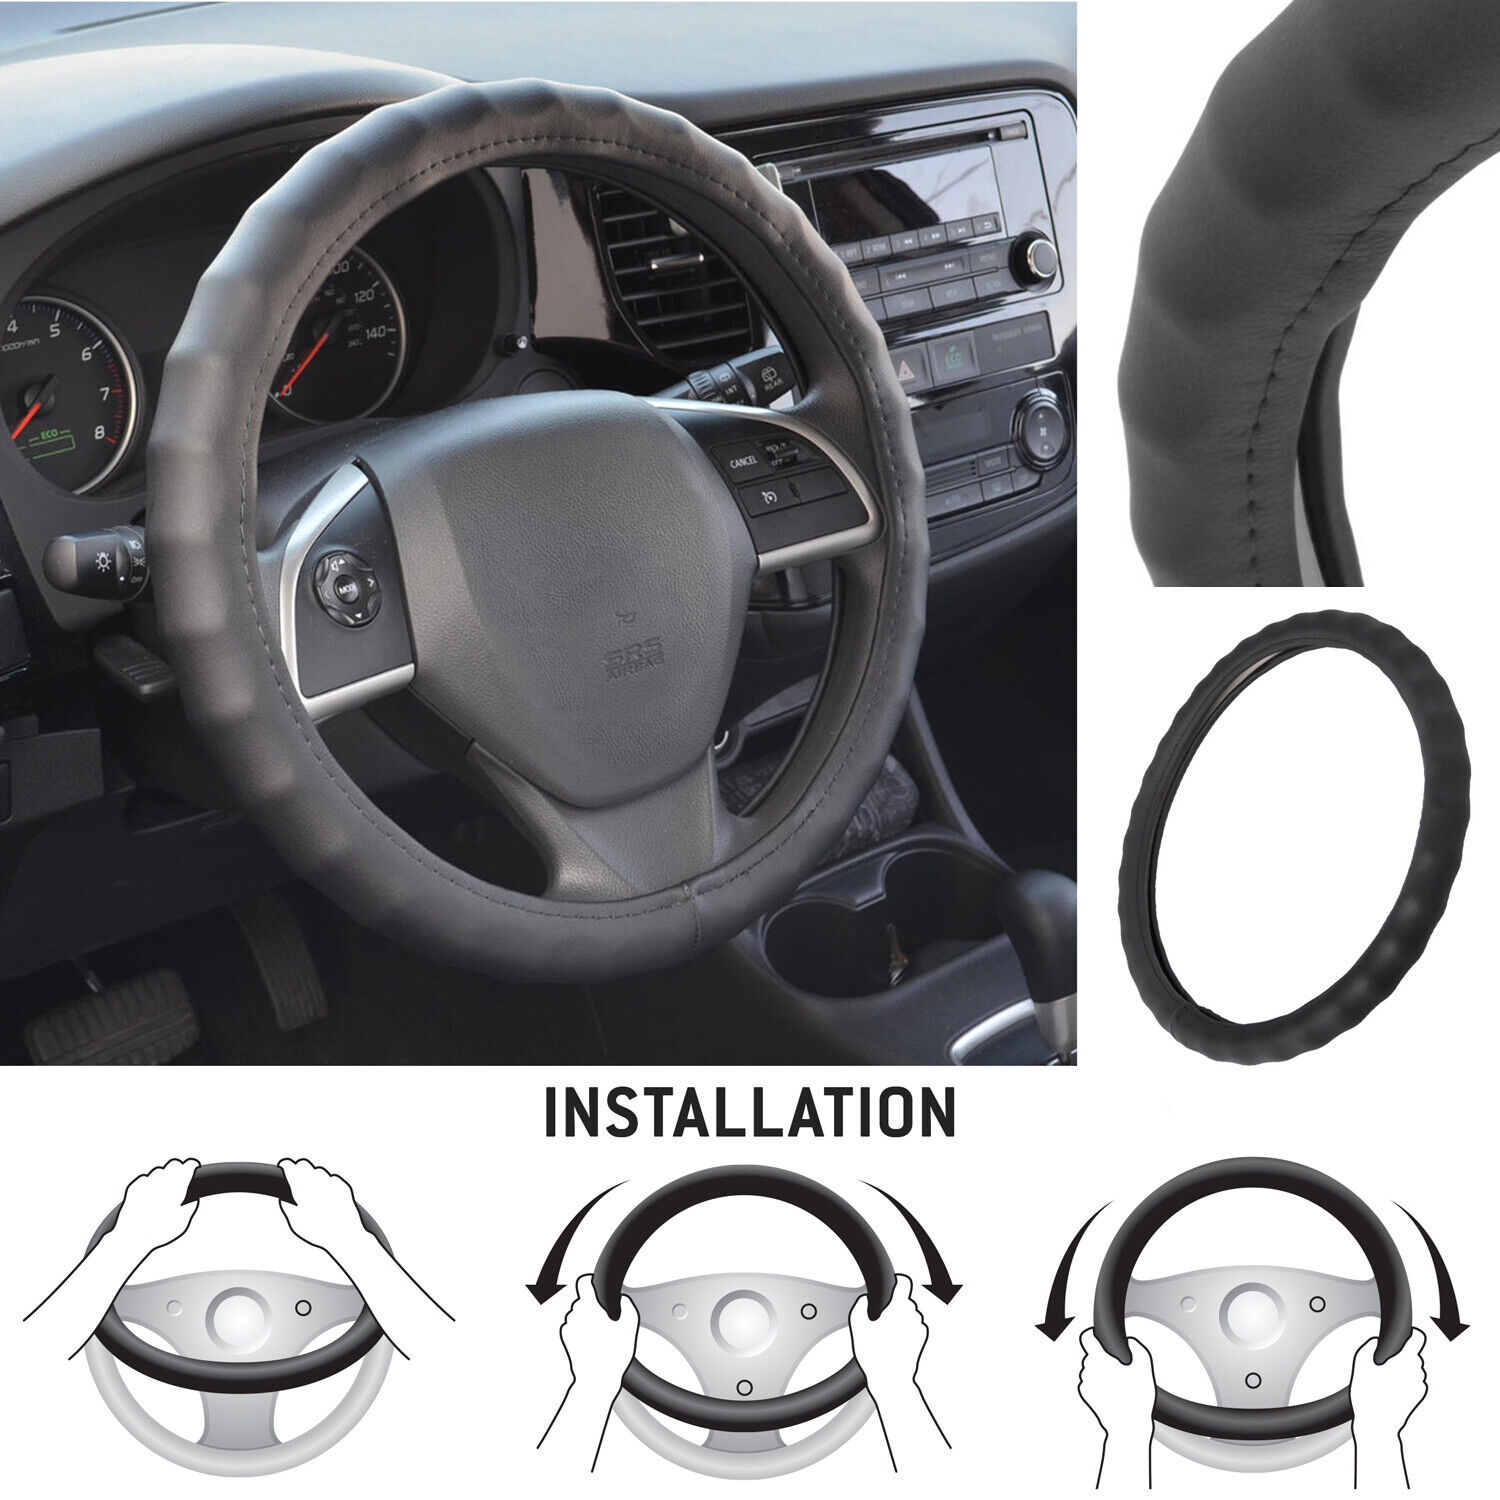 Genuine Leather Steering Wheel Cover for Car SUV Truck Medium 14.5